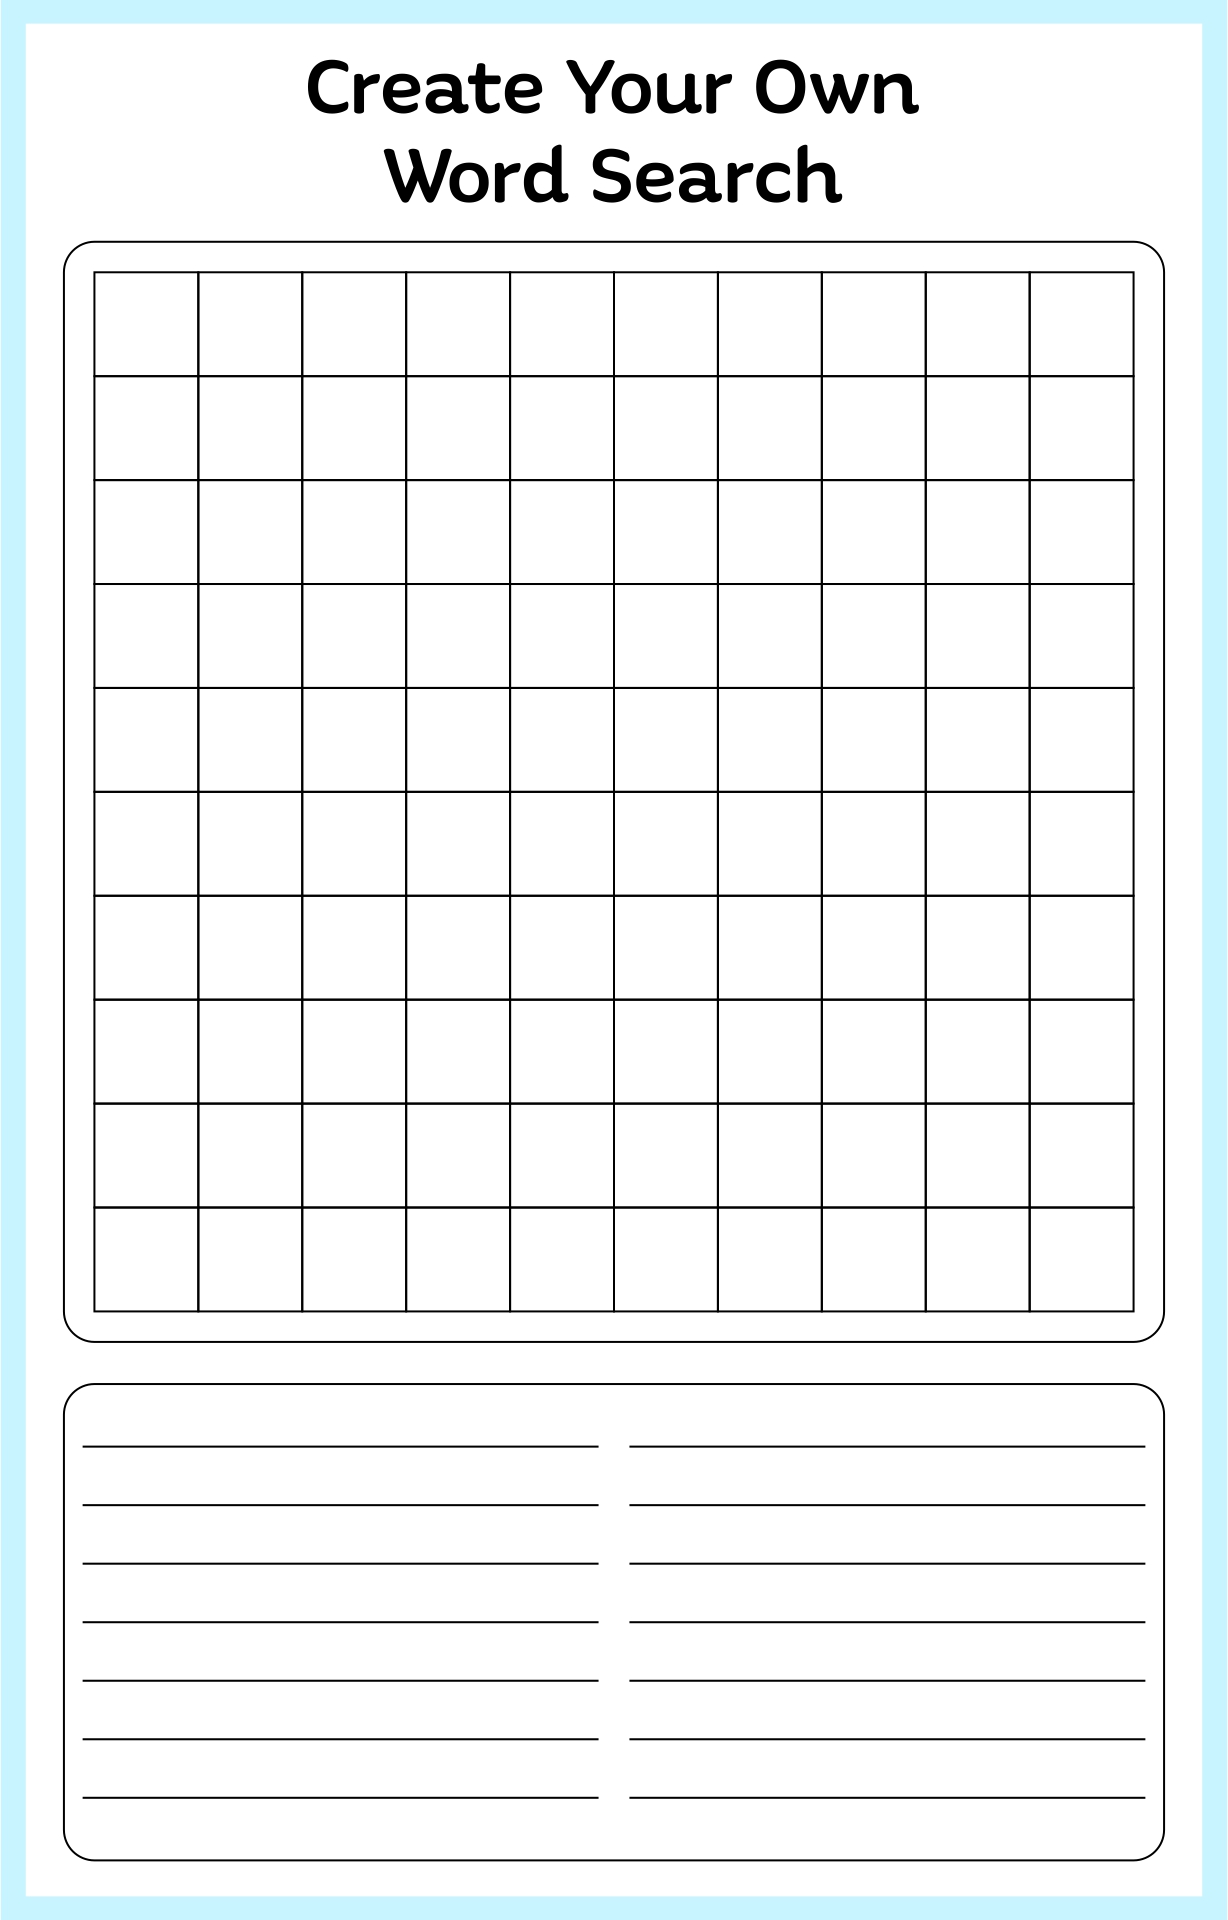 blank-word-search-worksheets-16-best-blank-word-search-puzzles